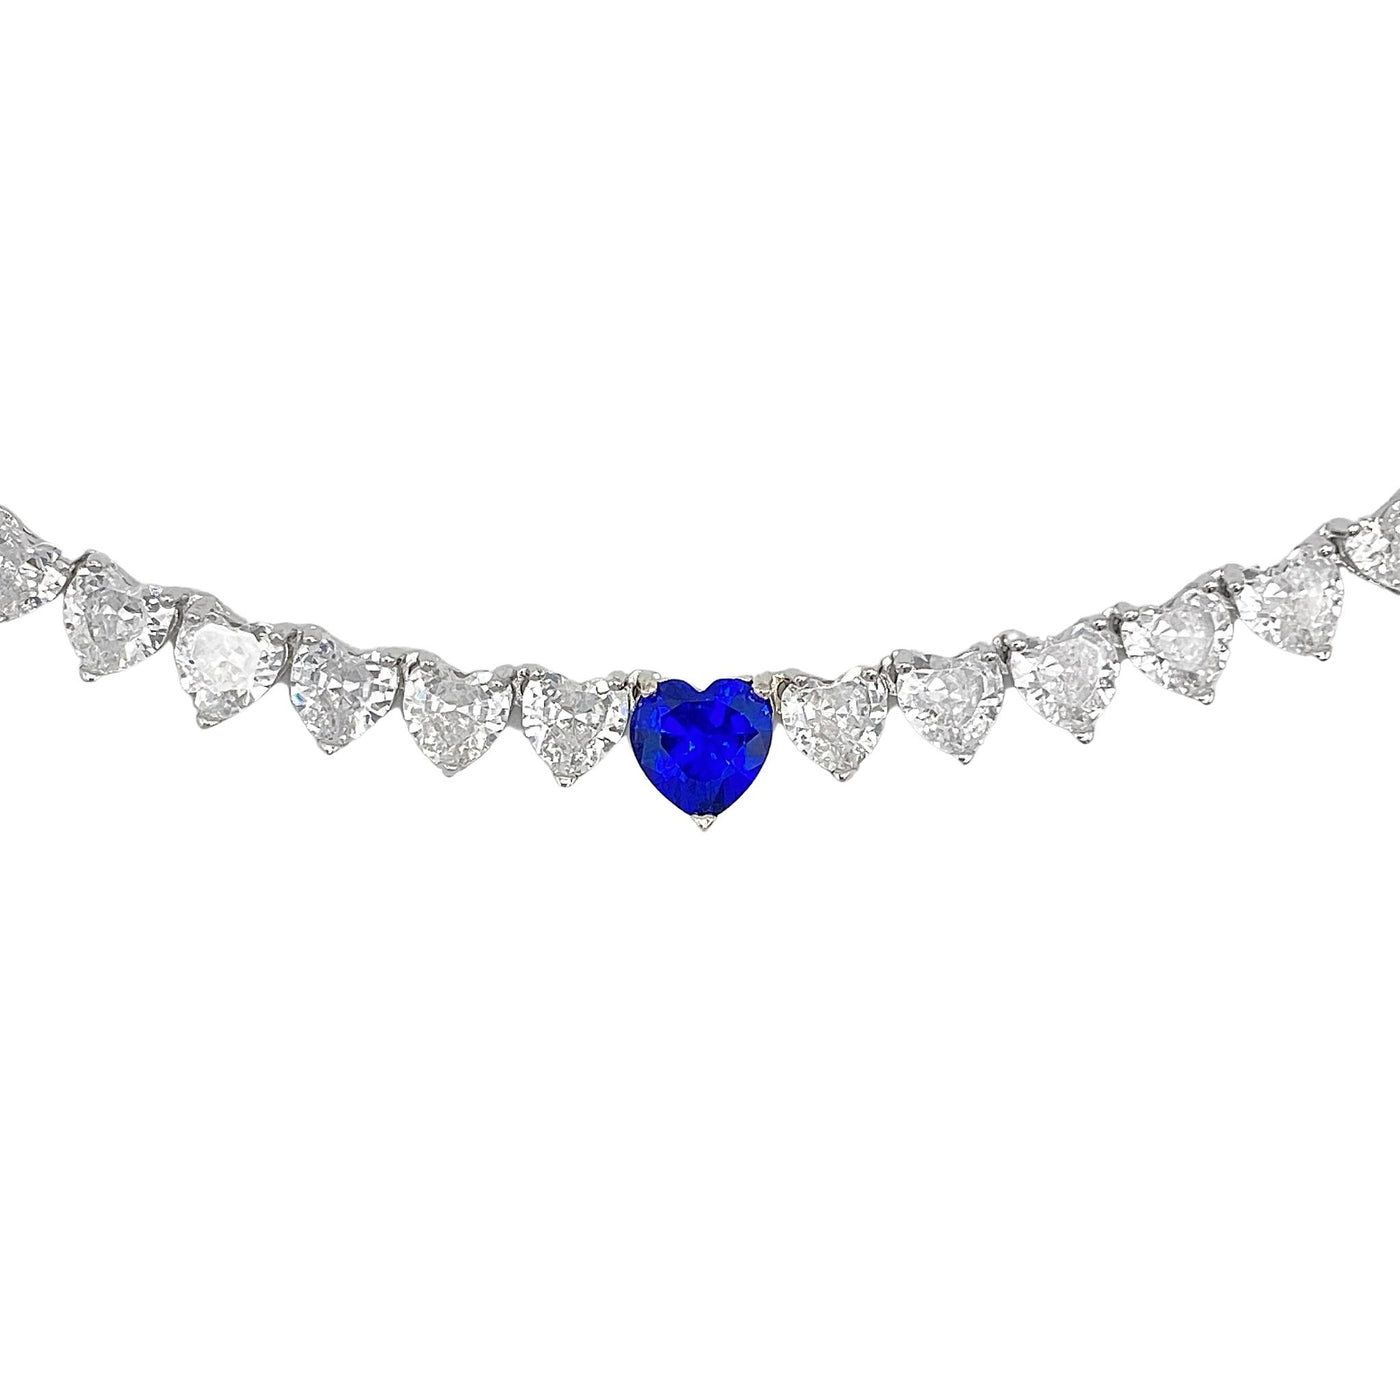 Silver hearts tennis necklace - 7 mm